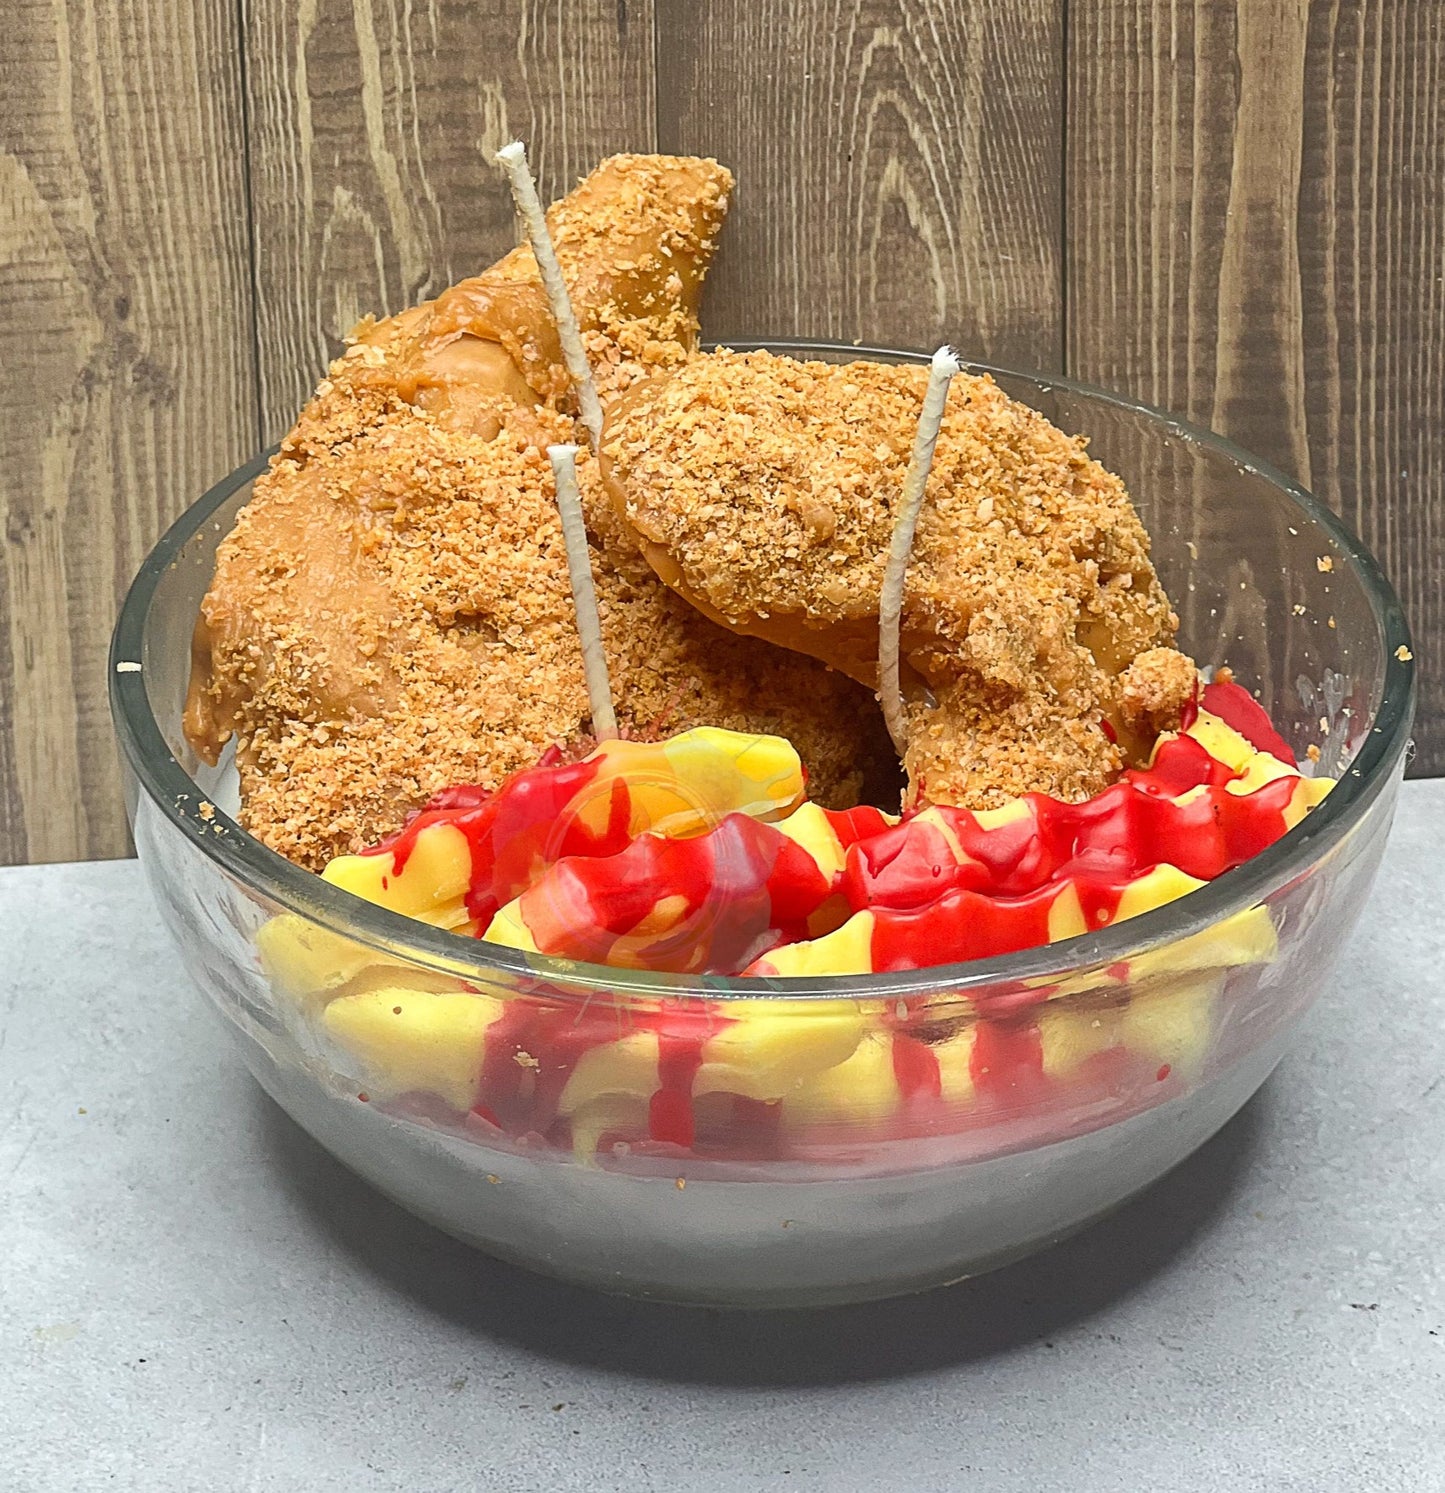 Photo of candle in glass bowl; candle designed to look like Fried chicken and French Fries with ketchup.